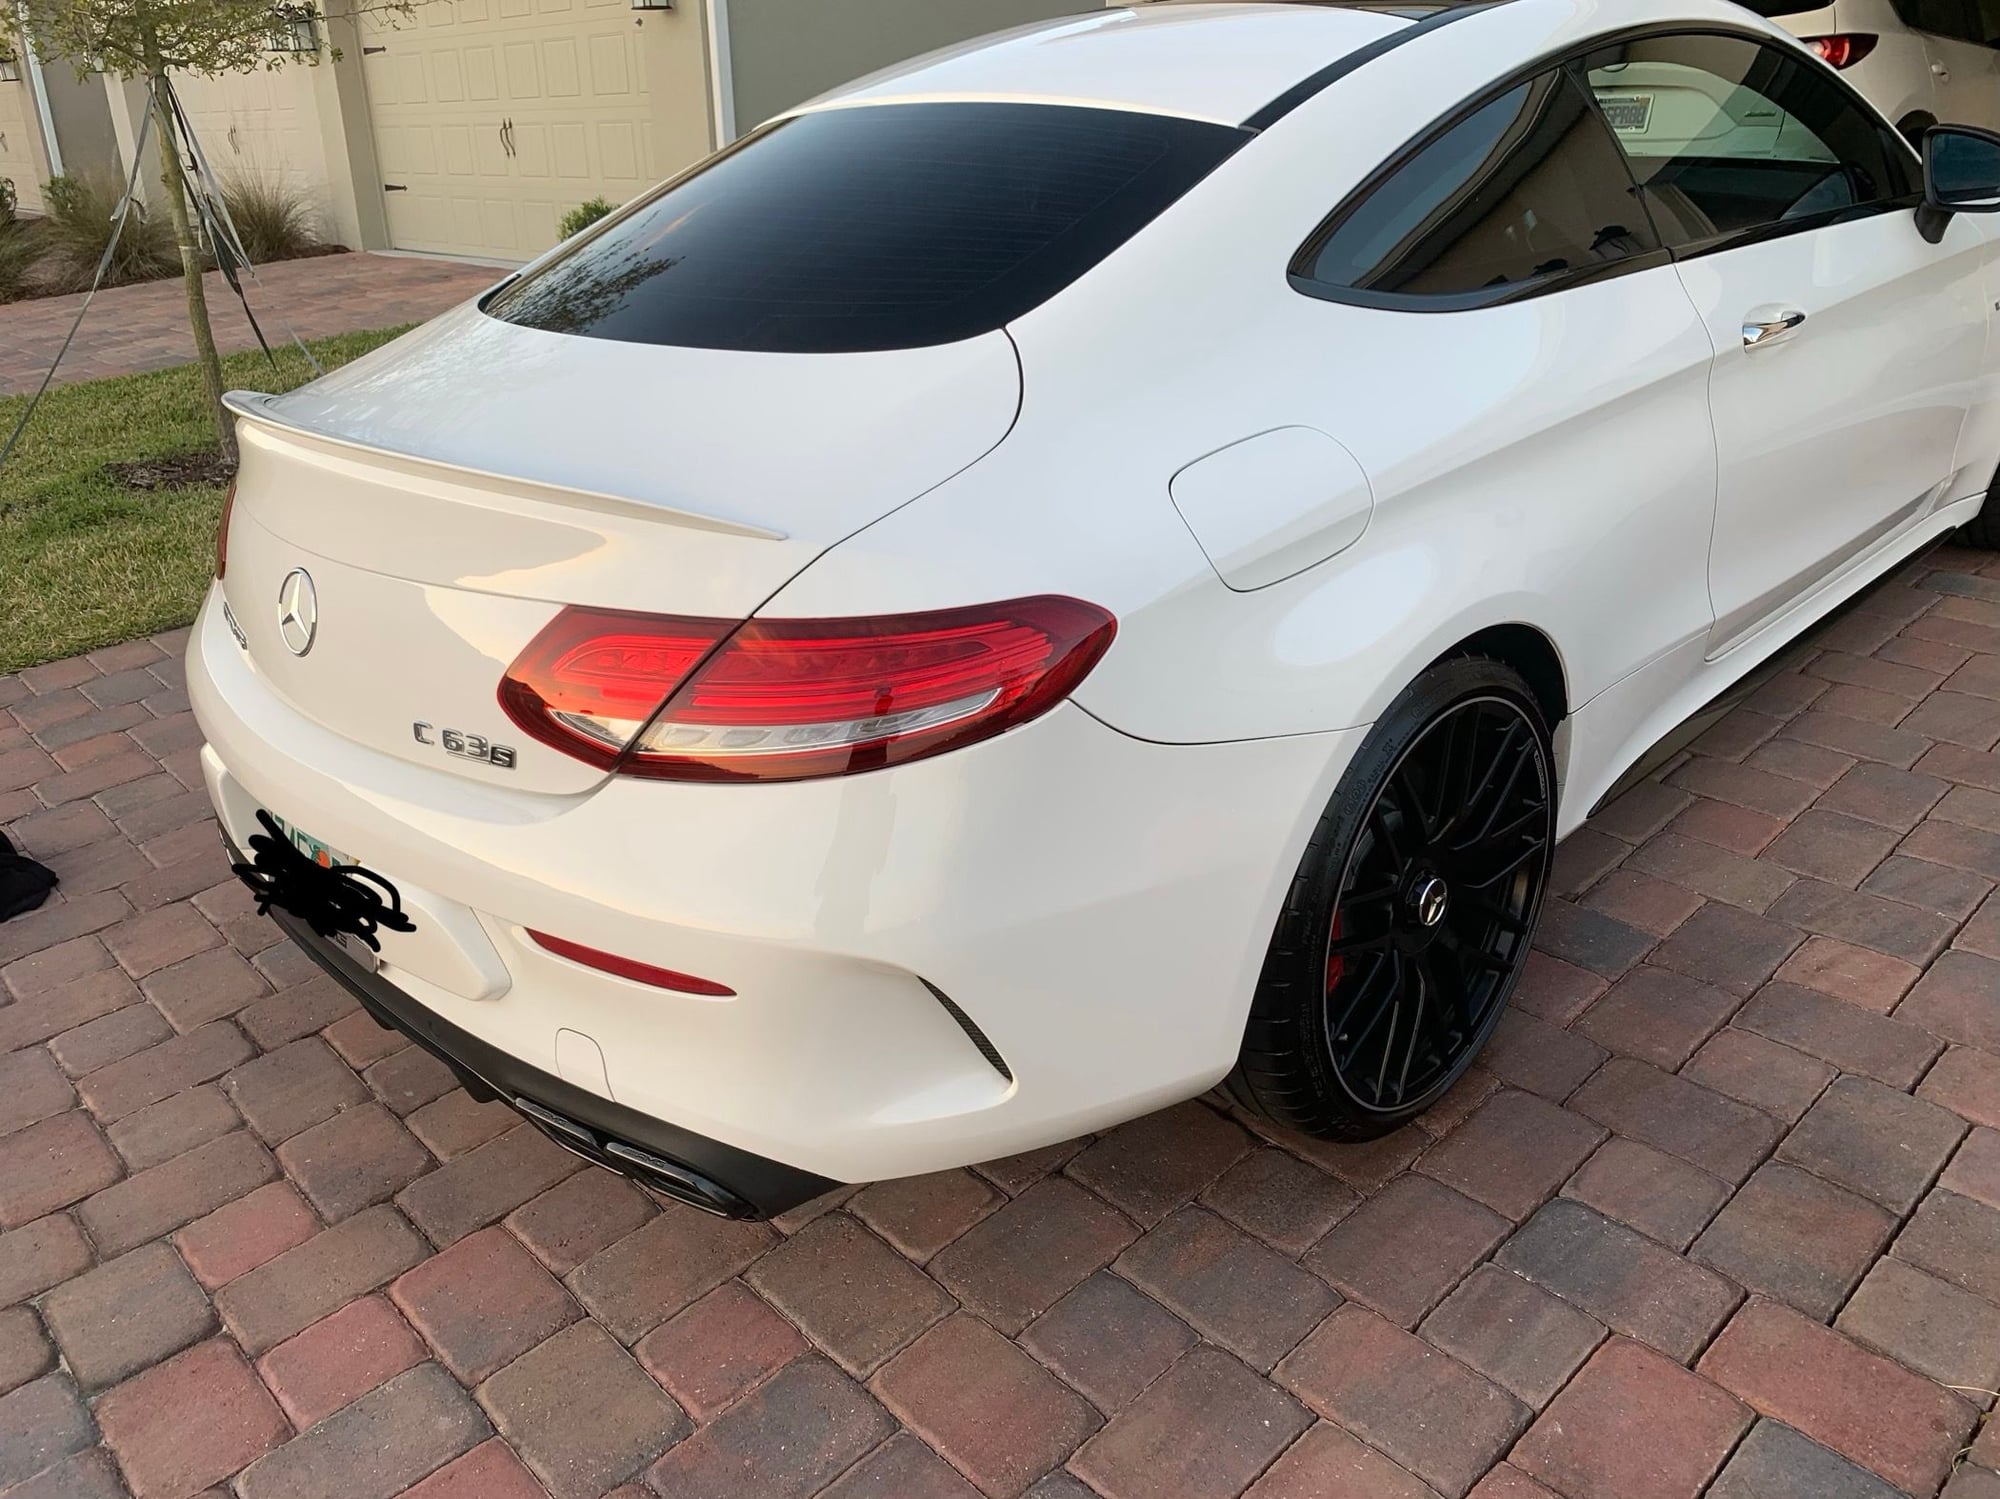 2017 Mercedes-Benz C63 AMG S - FS: 2017 Mercedes C63 AMG S (White) - Used - VIN WDDWJ8HB6HF475467 - 24,500 Miles - 8 cyl - 2WD - Automatic - Coupe - White - Orlando, FL 32832, United States